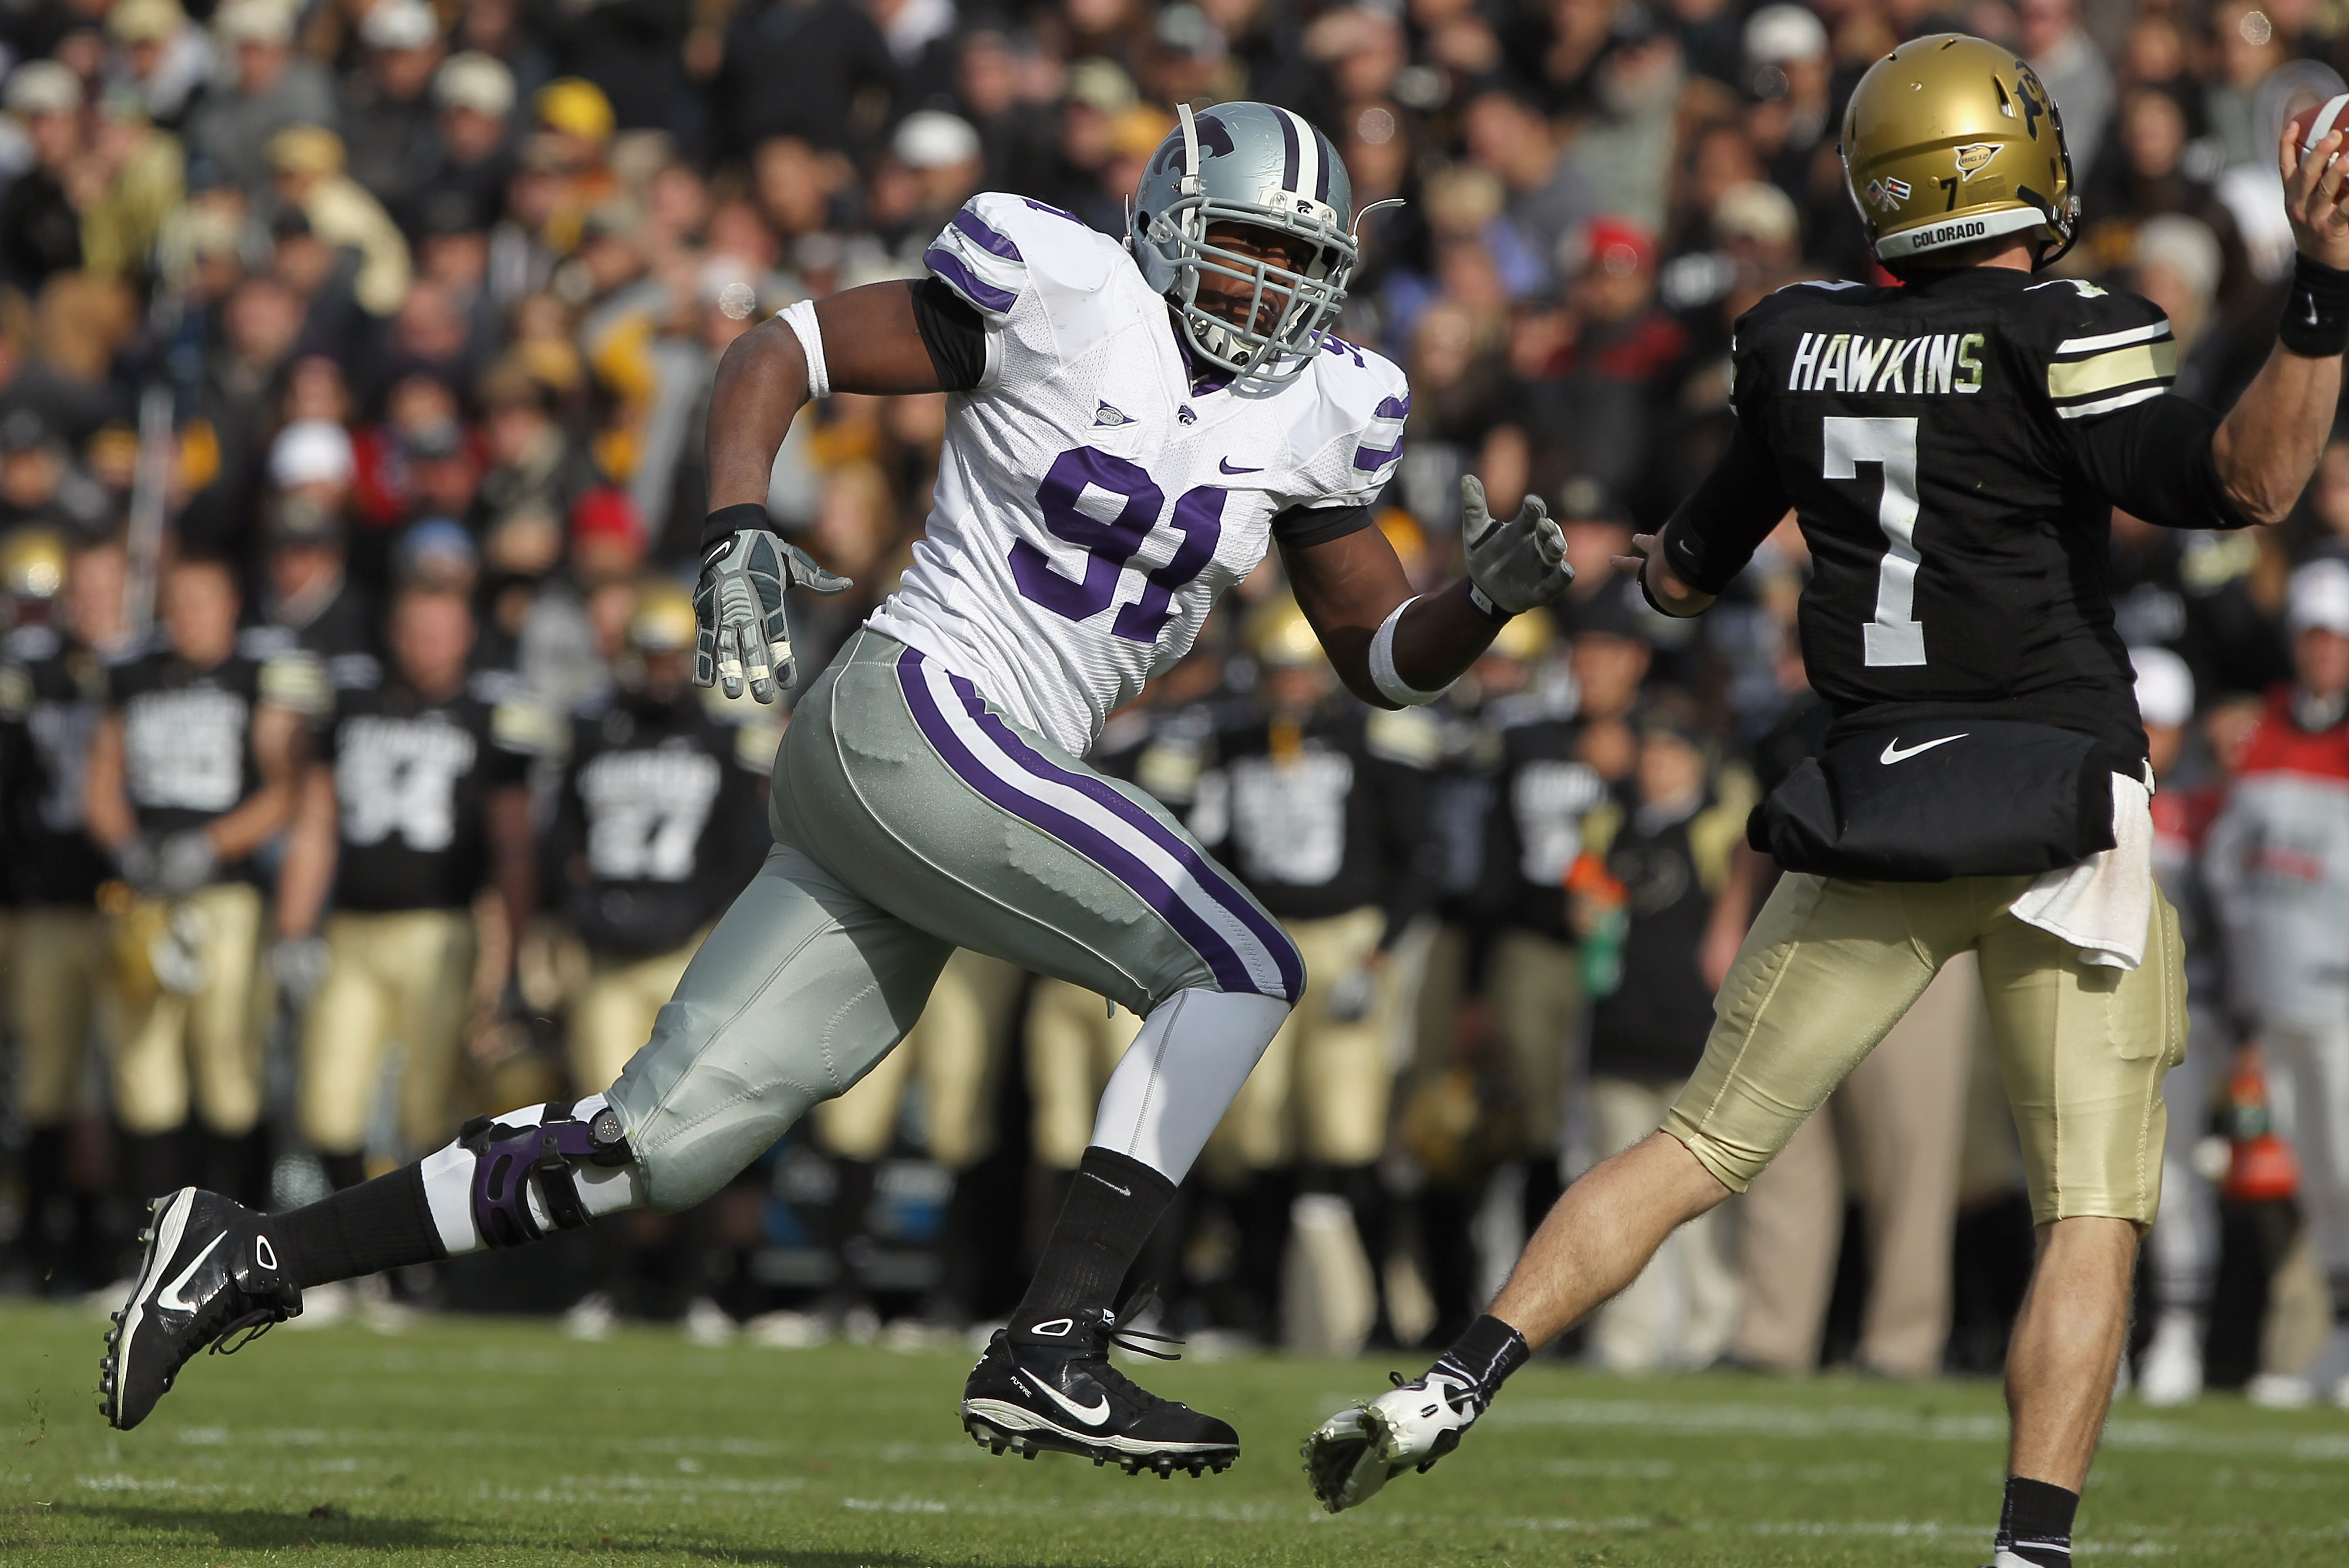 BOULDER, CO - NOVEMBER 20:  Defensive end Brandon Harold #91 of the Kansas State Wildcats rushes quarterback Cody Hawkins #7 of the Colorado Buffaloes at Folsom Field on November 20, 2010 in Boulder, Colorado. Colorado defeated Kansas State 44-36.  (Photo